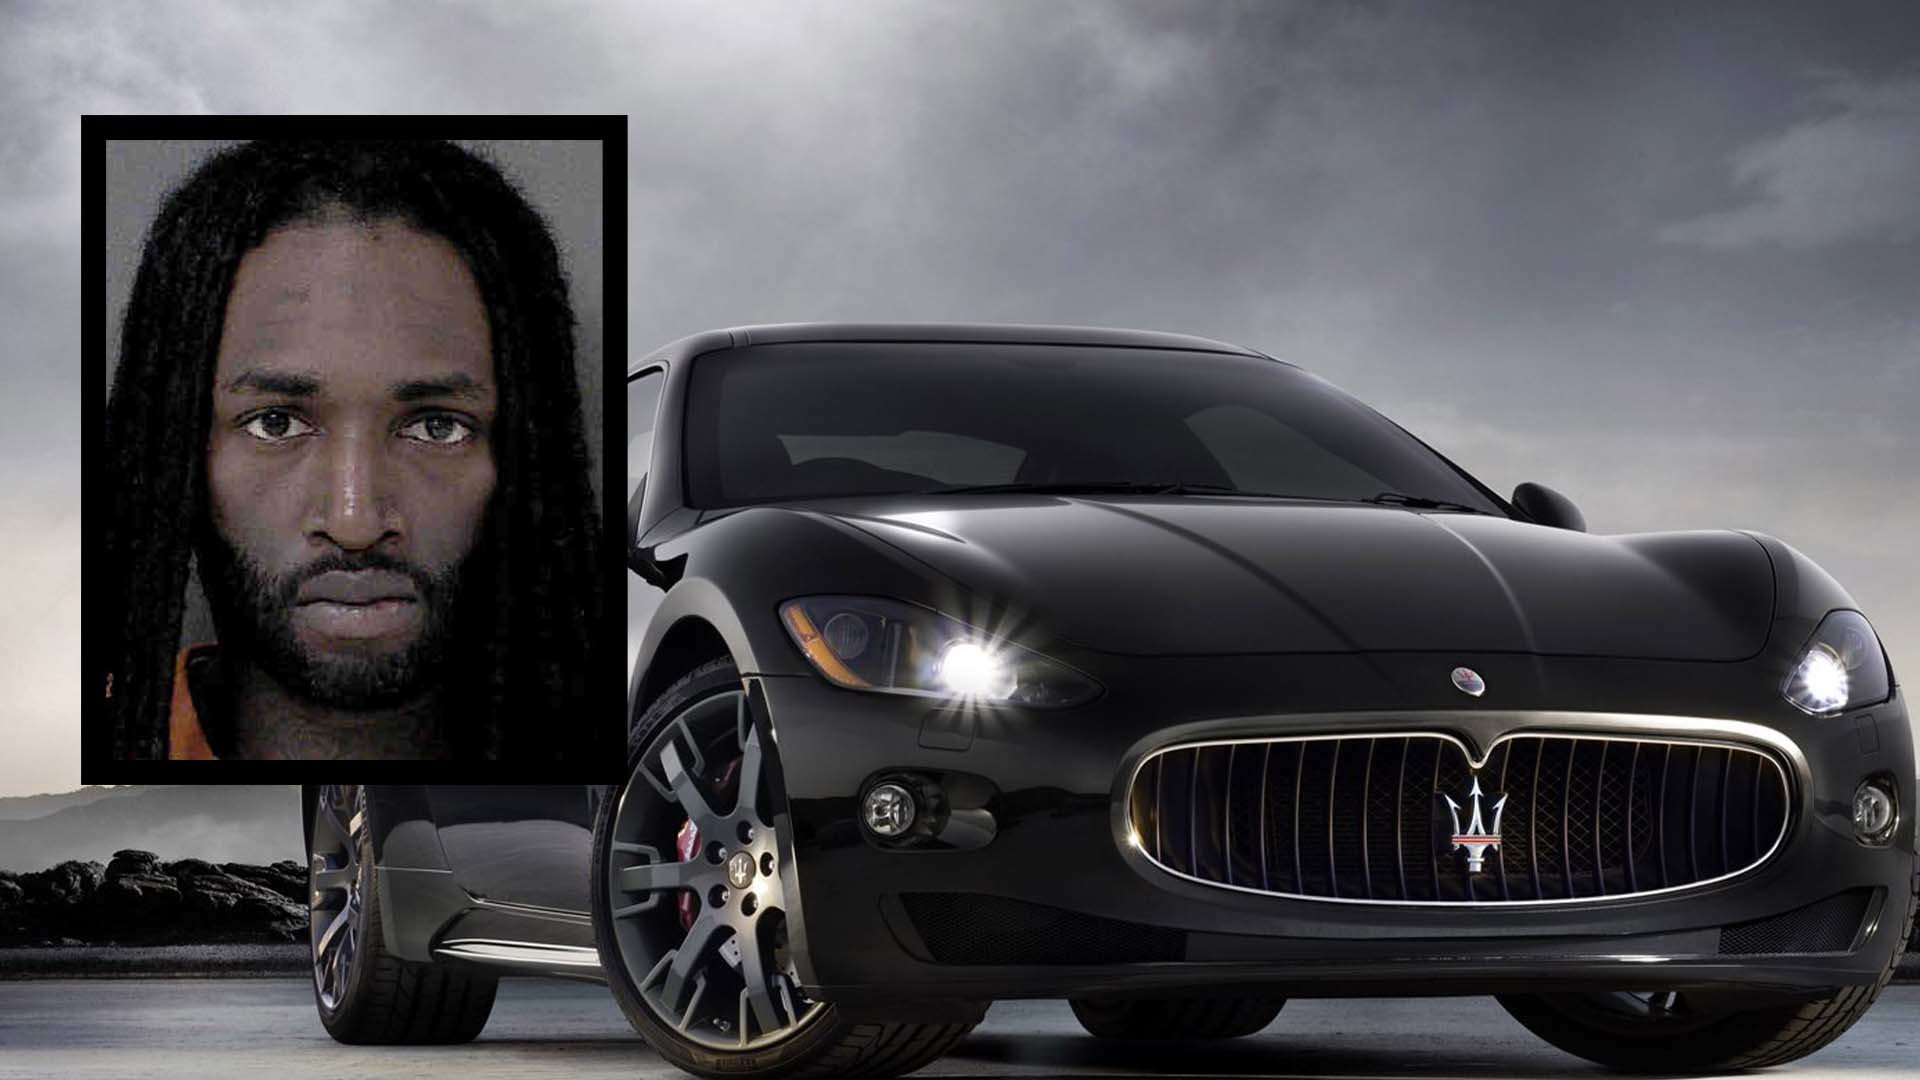 Jango Omar Touray, 27, of Charlotte, North Carolina, was sentenced on Tuesday, July 19, 2022, to 14 years in prison for stealing a Maserati and robbing a pawnshop at gunpoint. Composite by Coffee or Die Magazine.